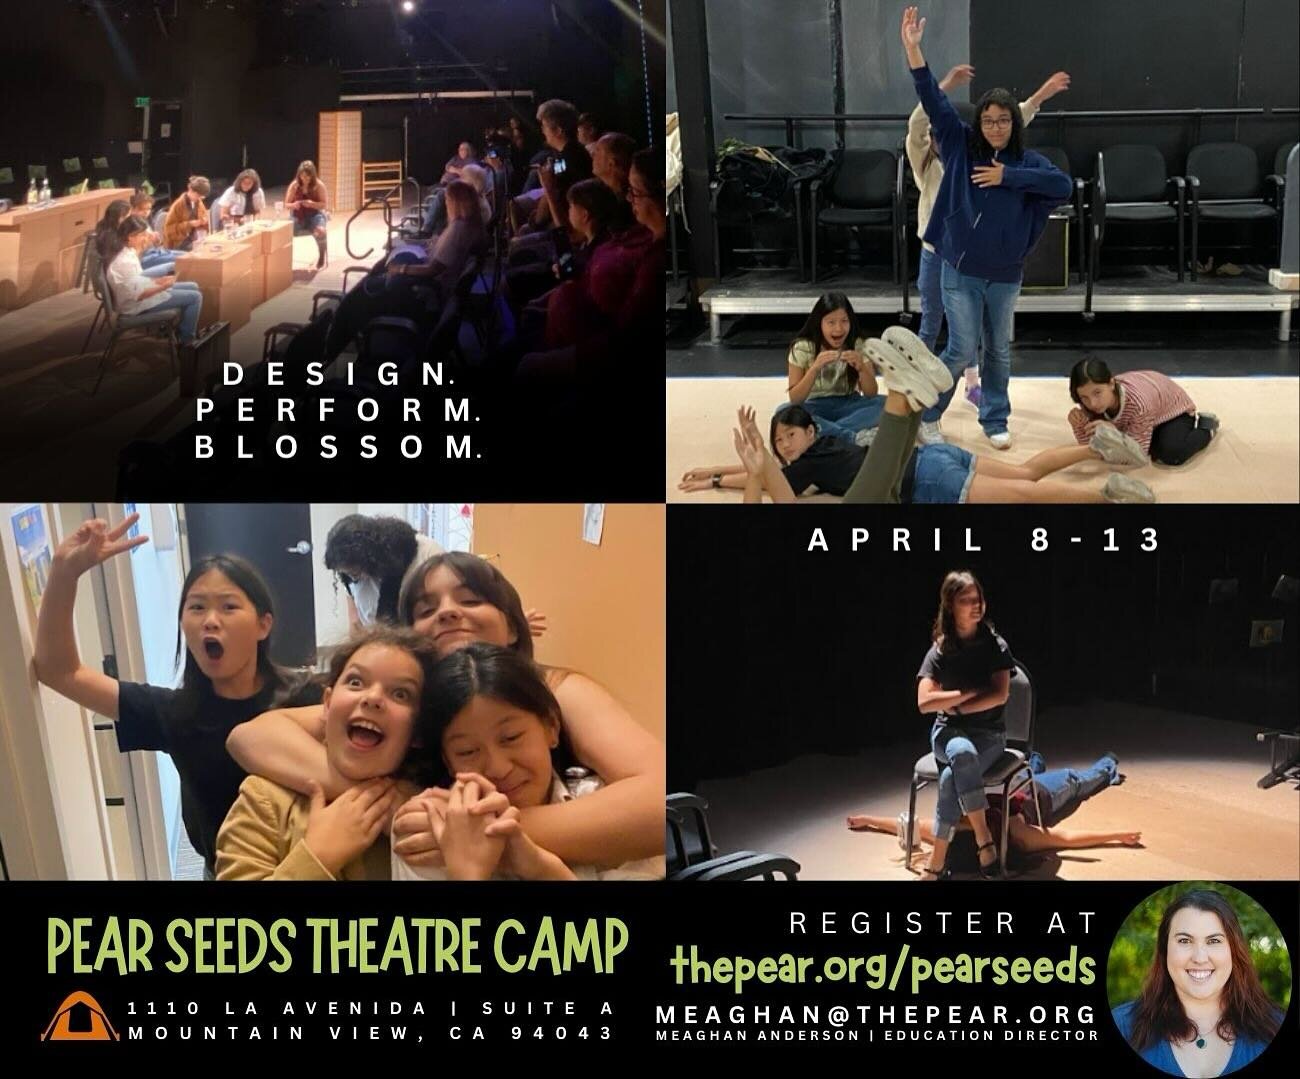 &ldquo;And they all lived happily under the sea!&rdquo; Wait, that&rsquo;s not right. &ldquo;And they all lived hungrily ever after!&rdquo; Still not right - but it sure suits the theme of our spring theatre camp at The Pear!

Join us April 8-13 for 